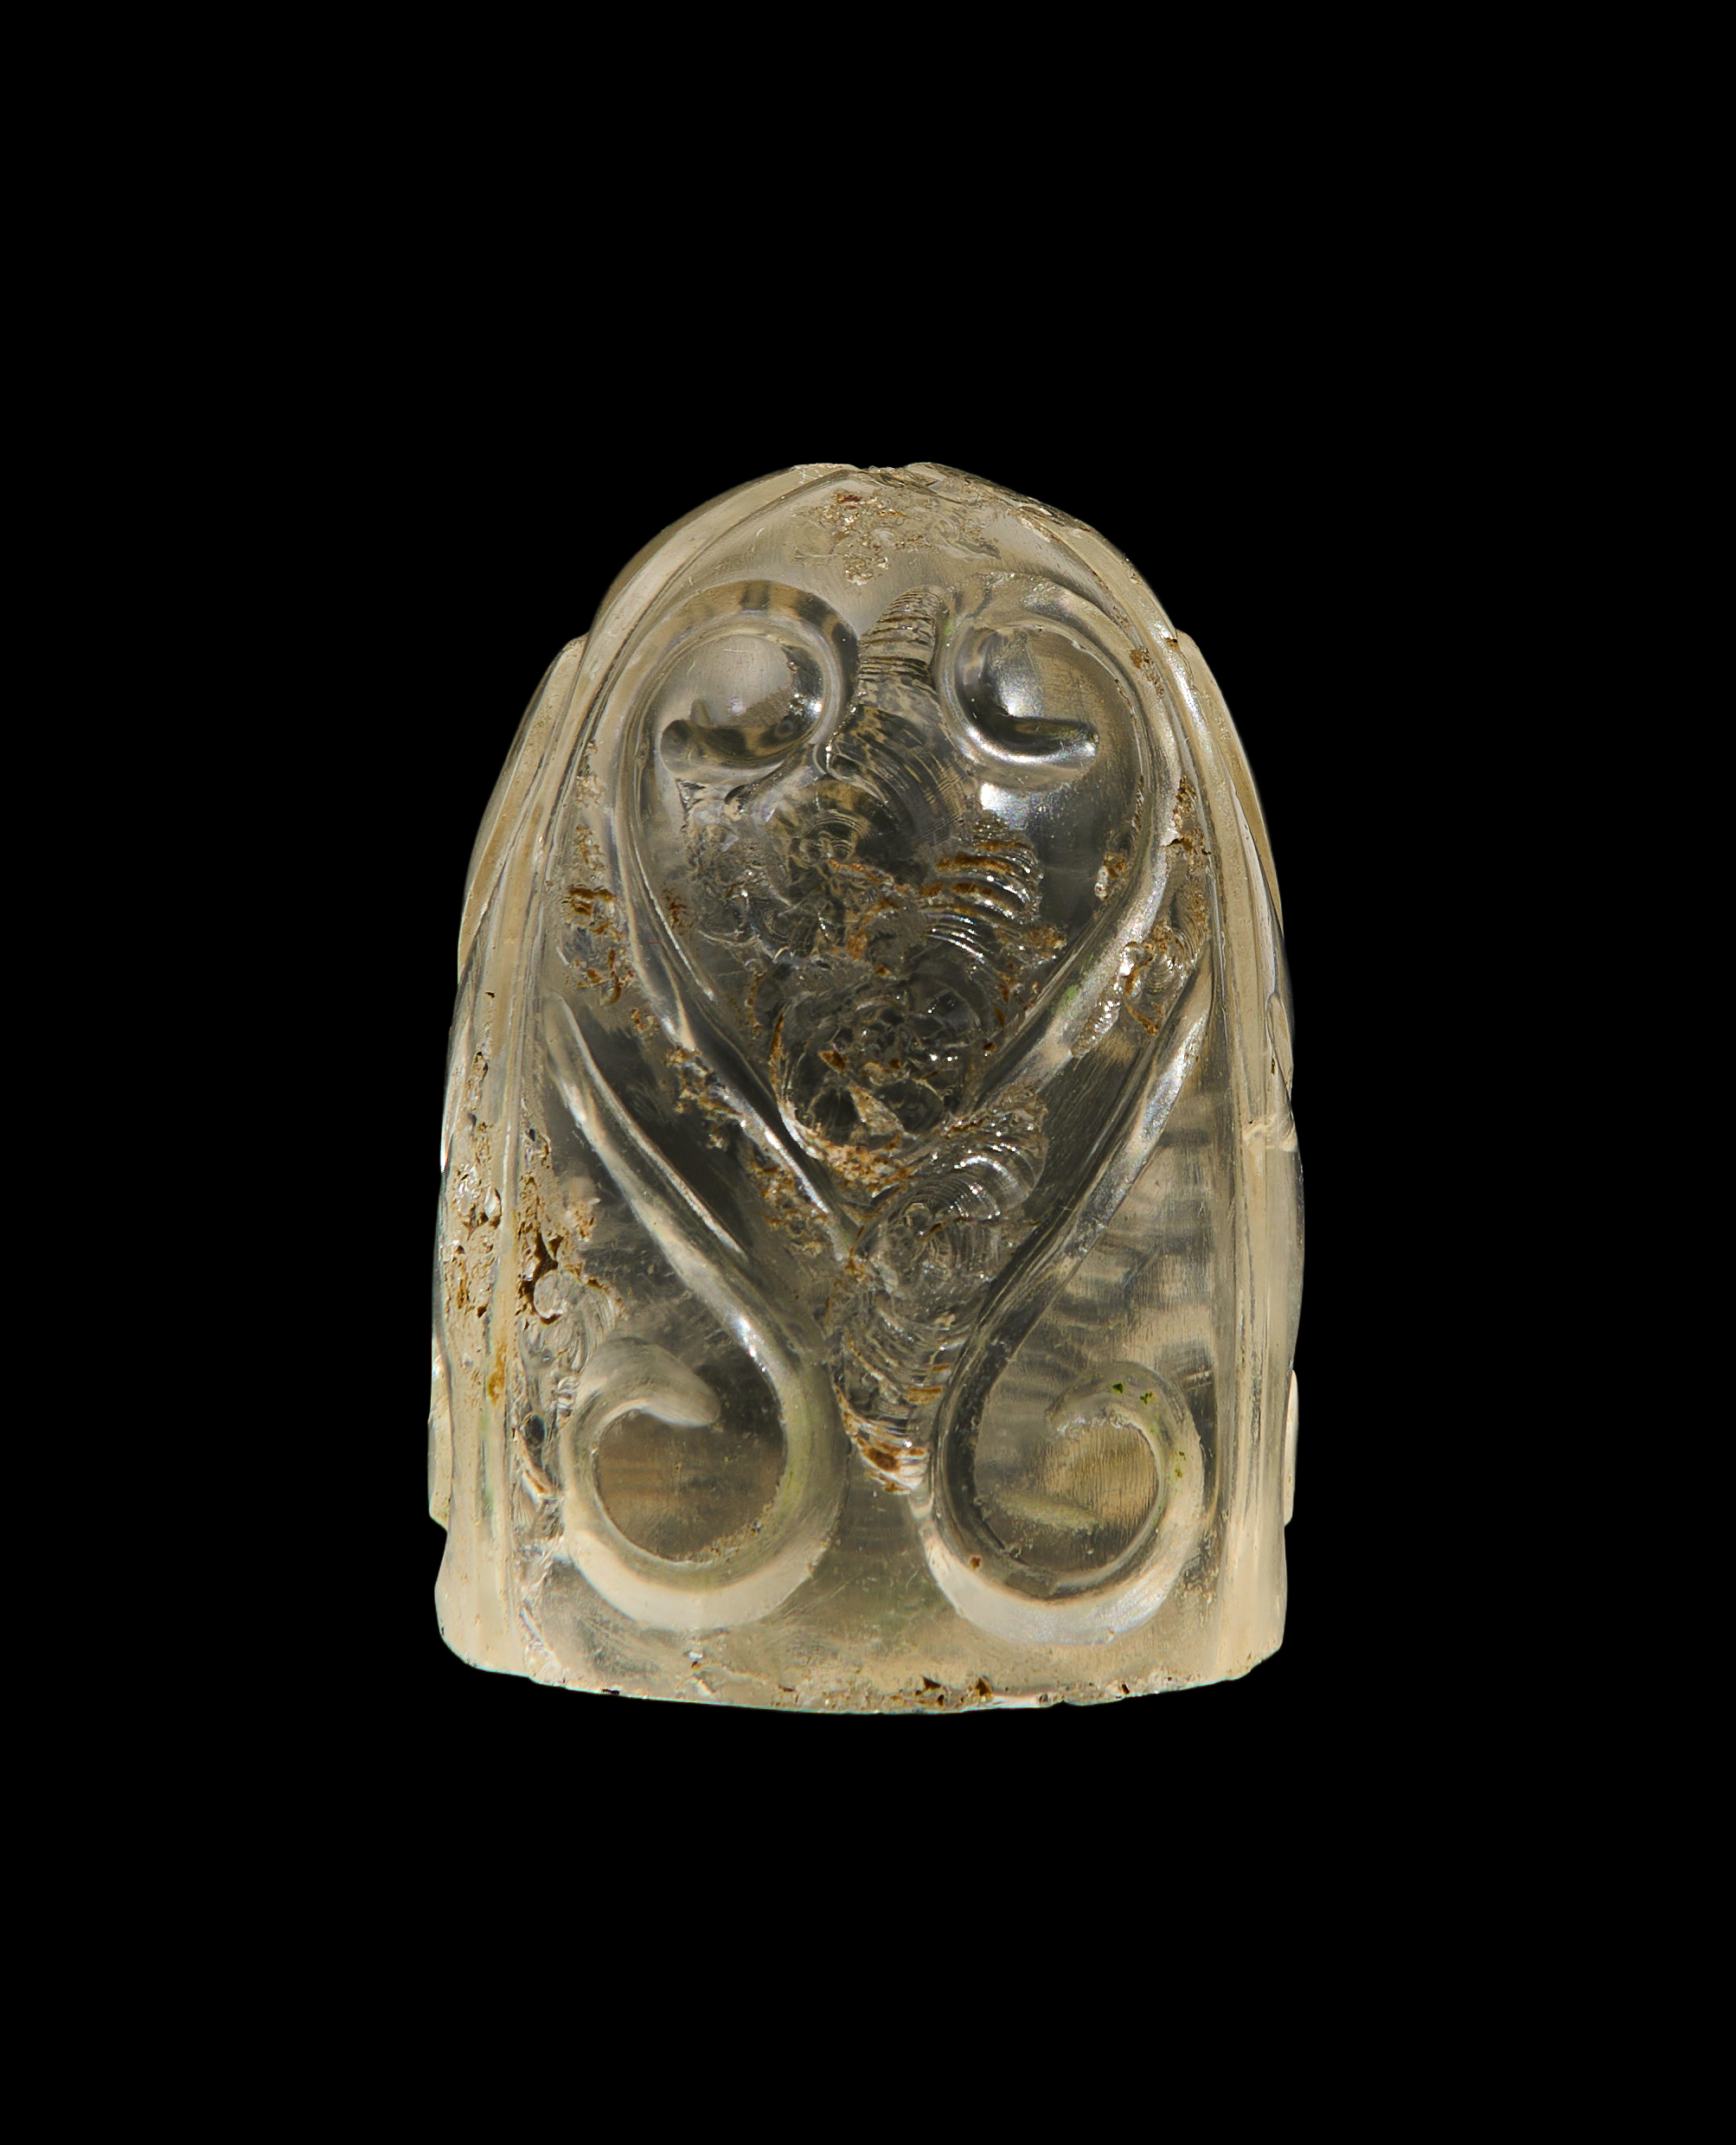 A FATIMID CARVED ROCK CRYSTAL CHESS PIECE, 9TH/10TH CENTURY, EGYPT